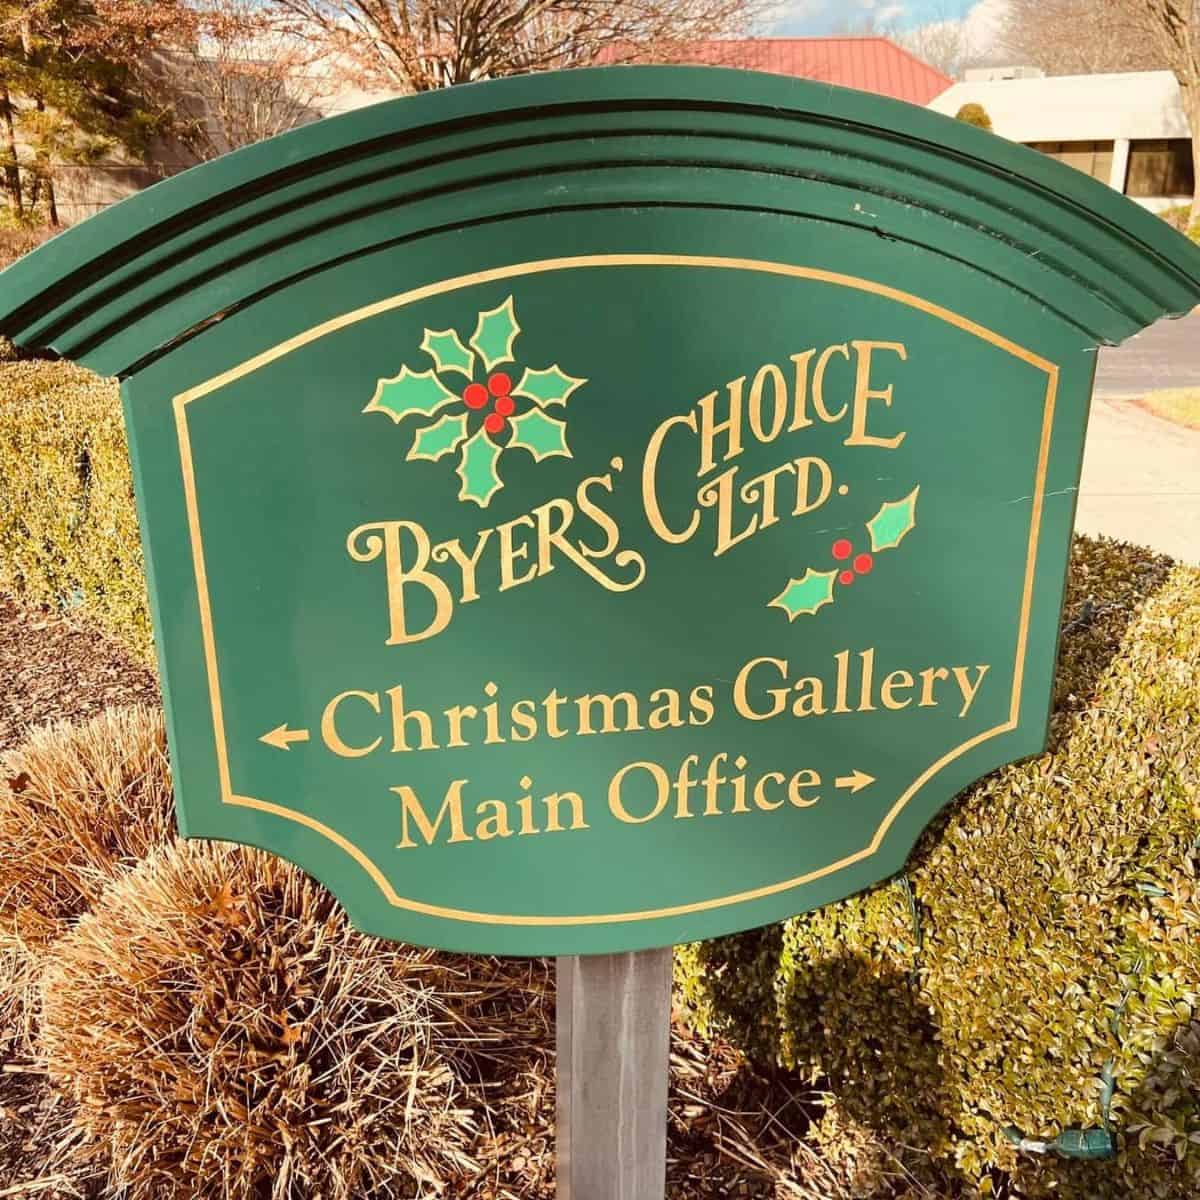 byers choice ltd. sign at headquarters.